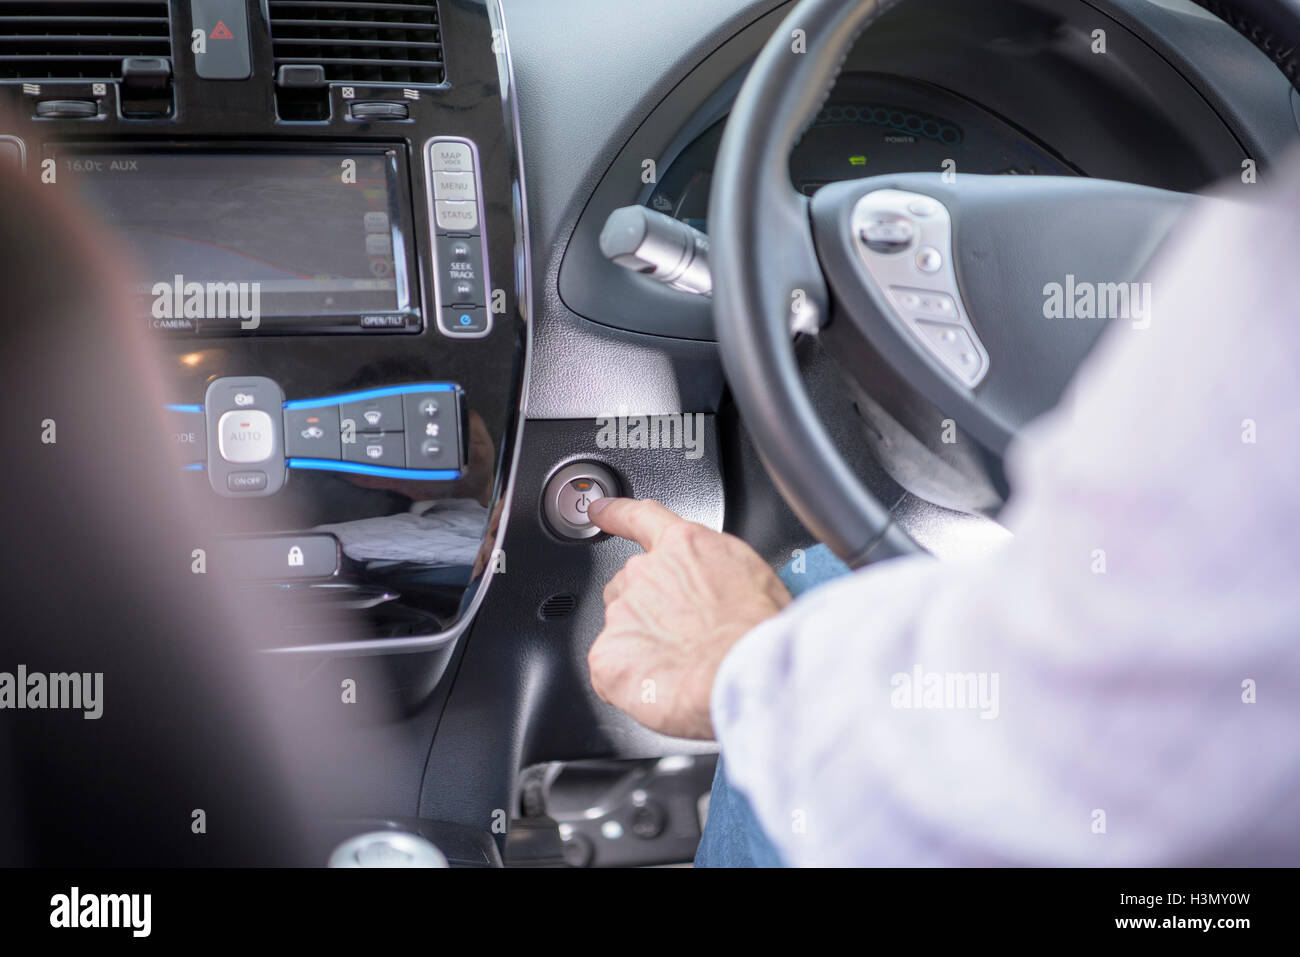 Man pressing start button on electric car, close up Stock Photo